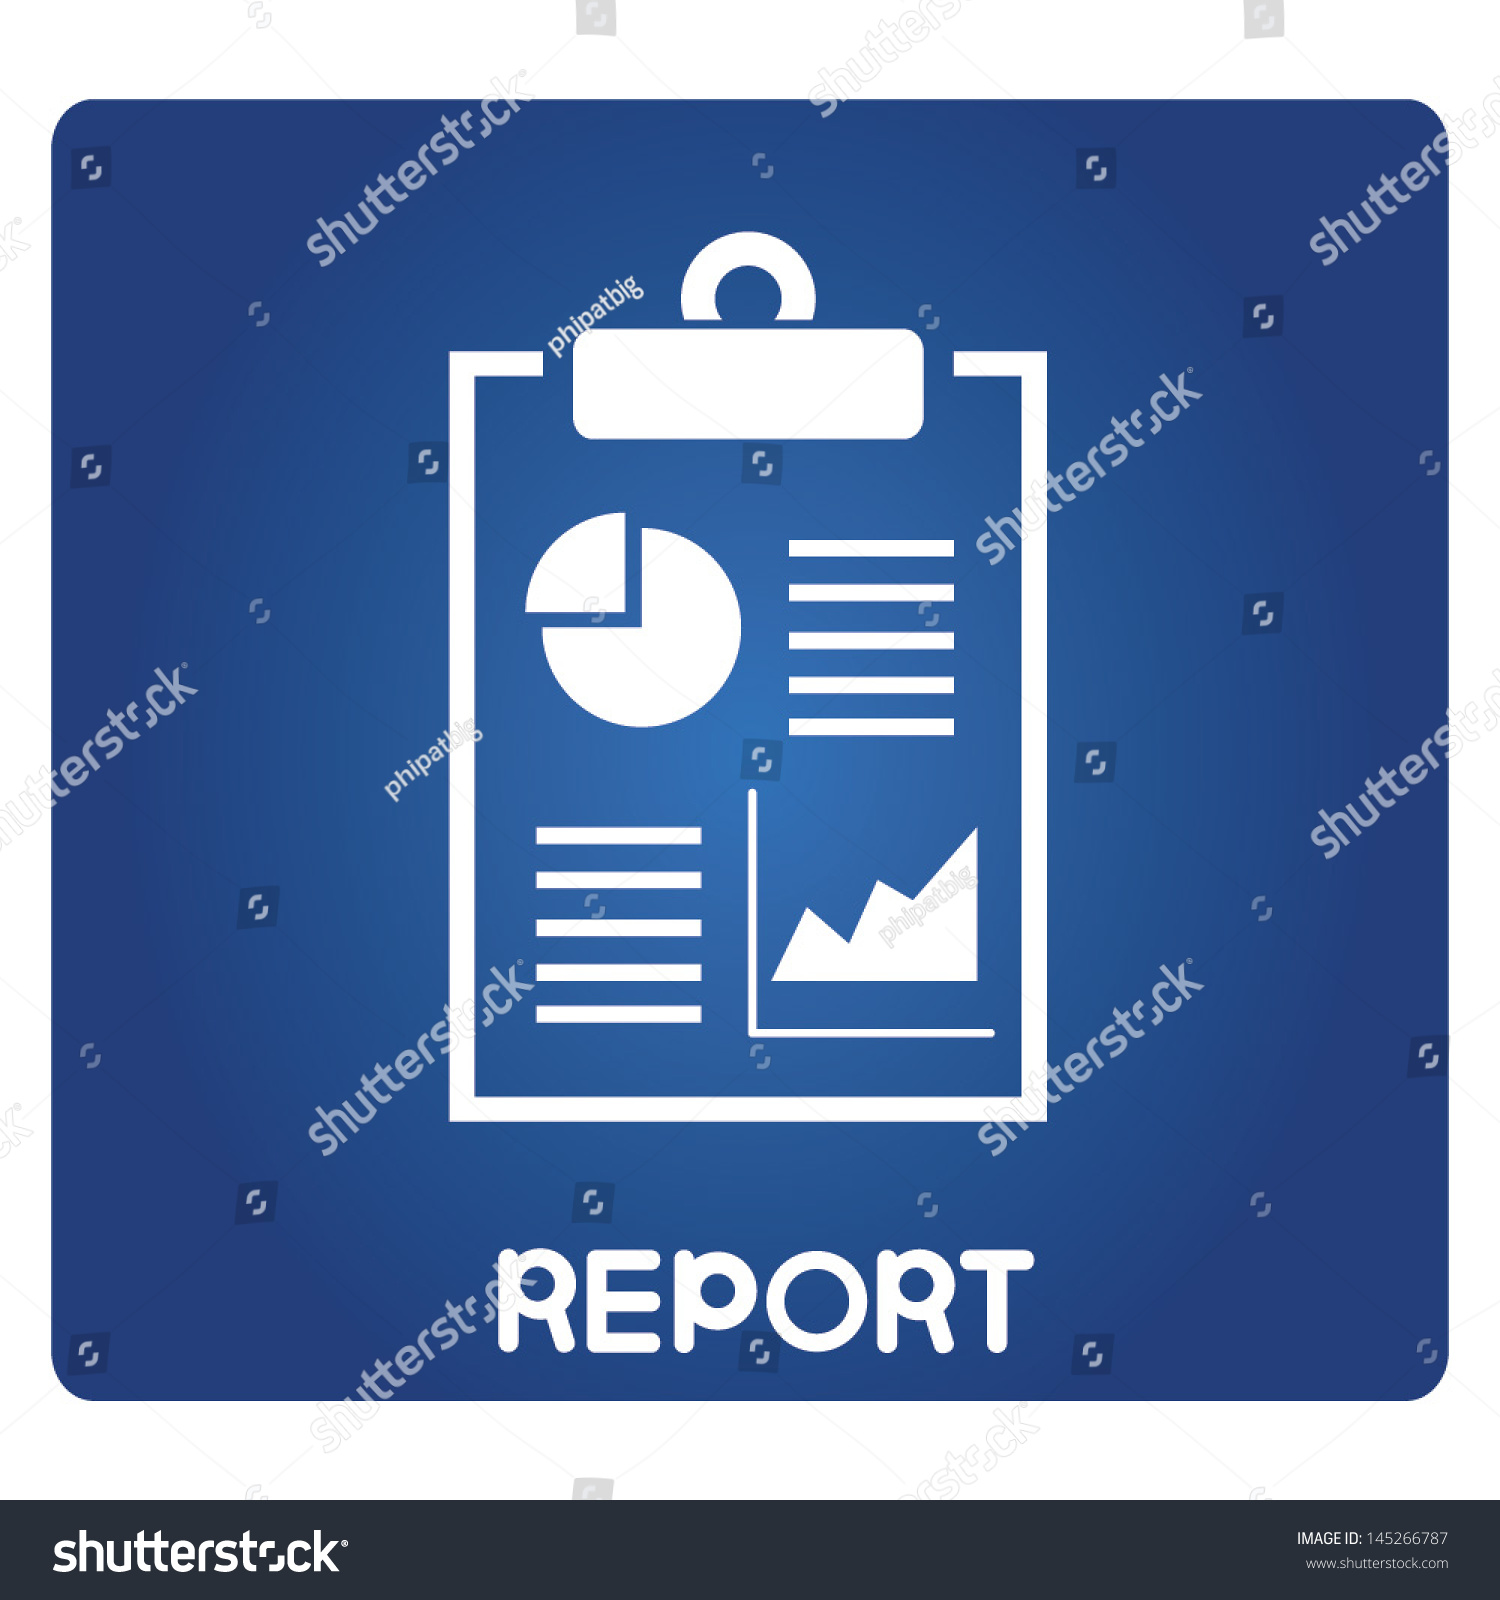 clip art business reports - photo #8